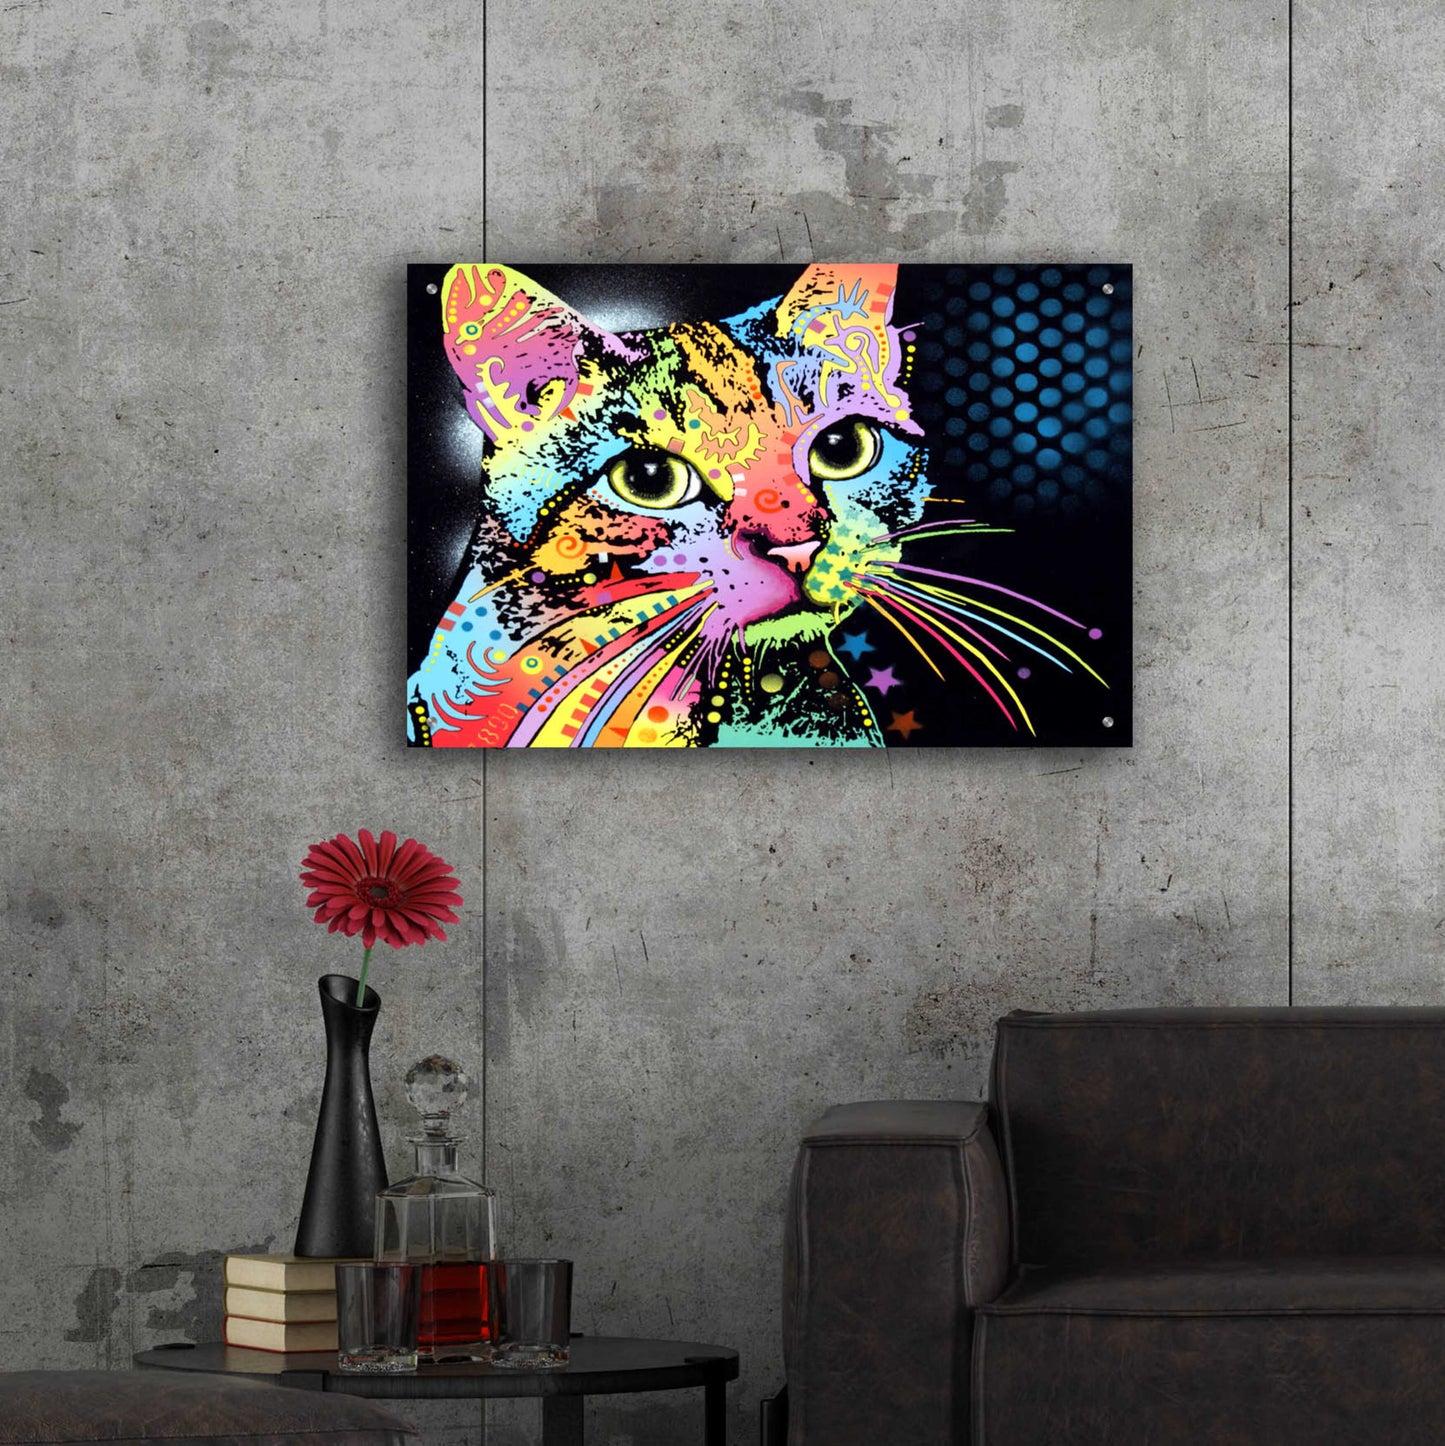 Epic Art 'Catillac New' by Dean Russo, Acrylic Glass Wall Art,36x24